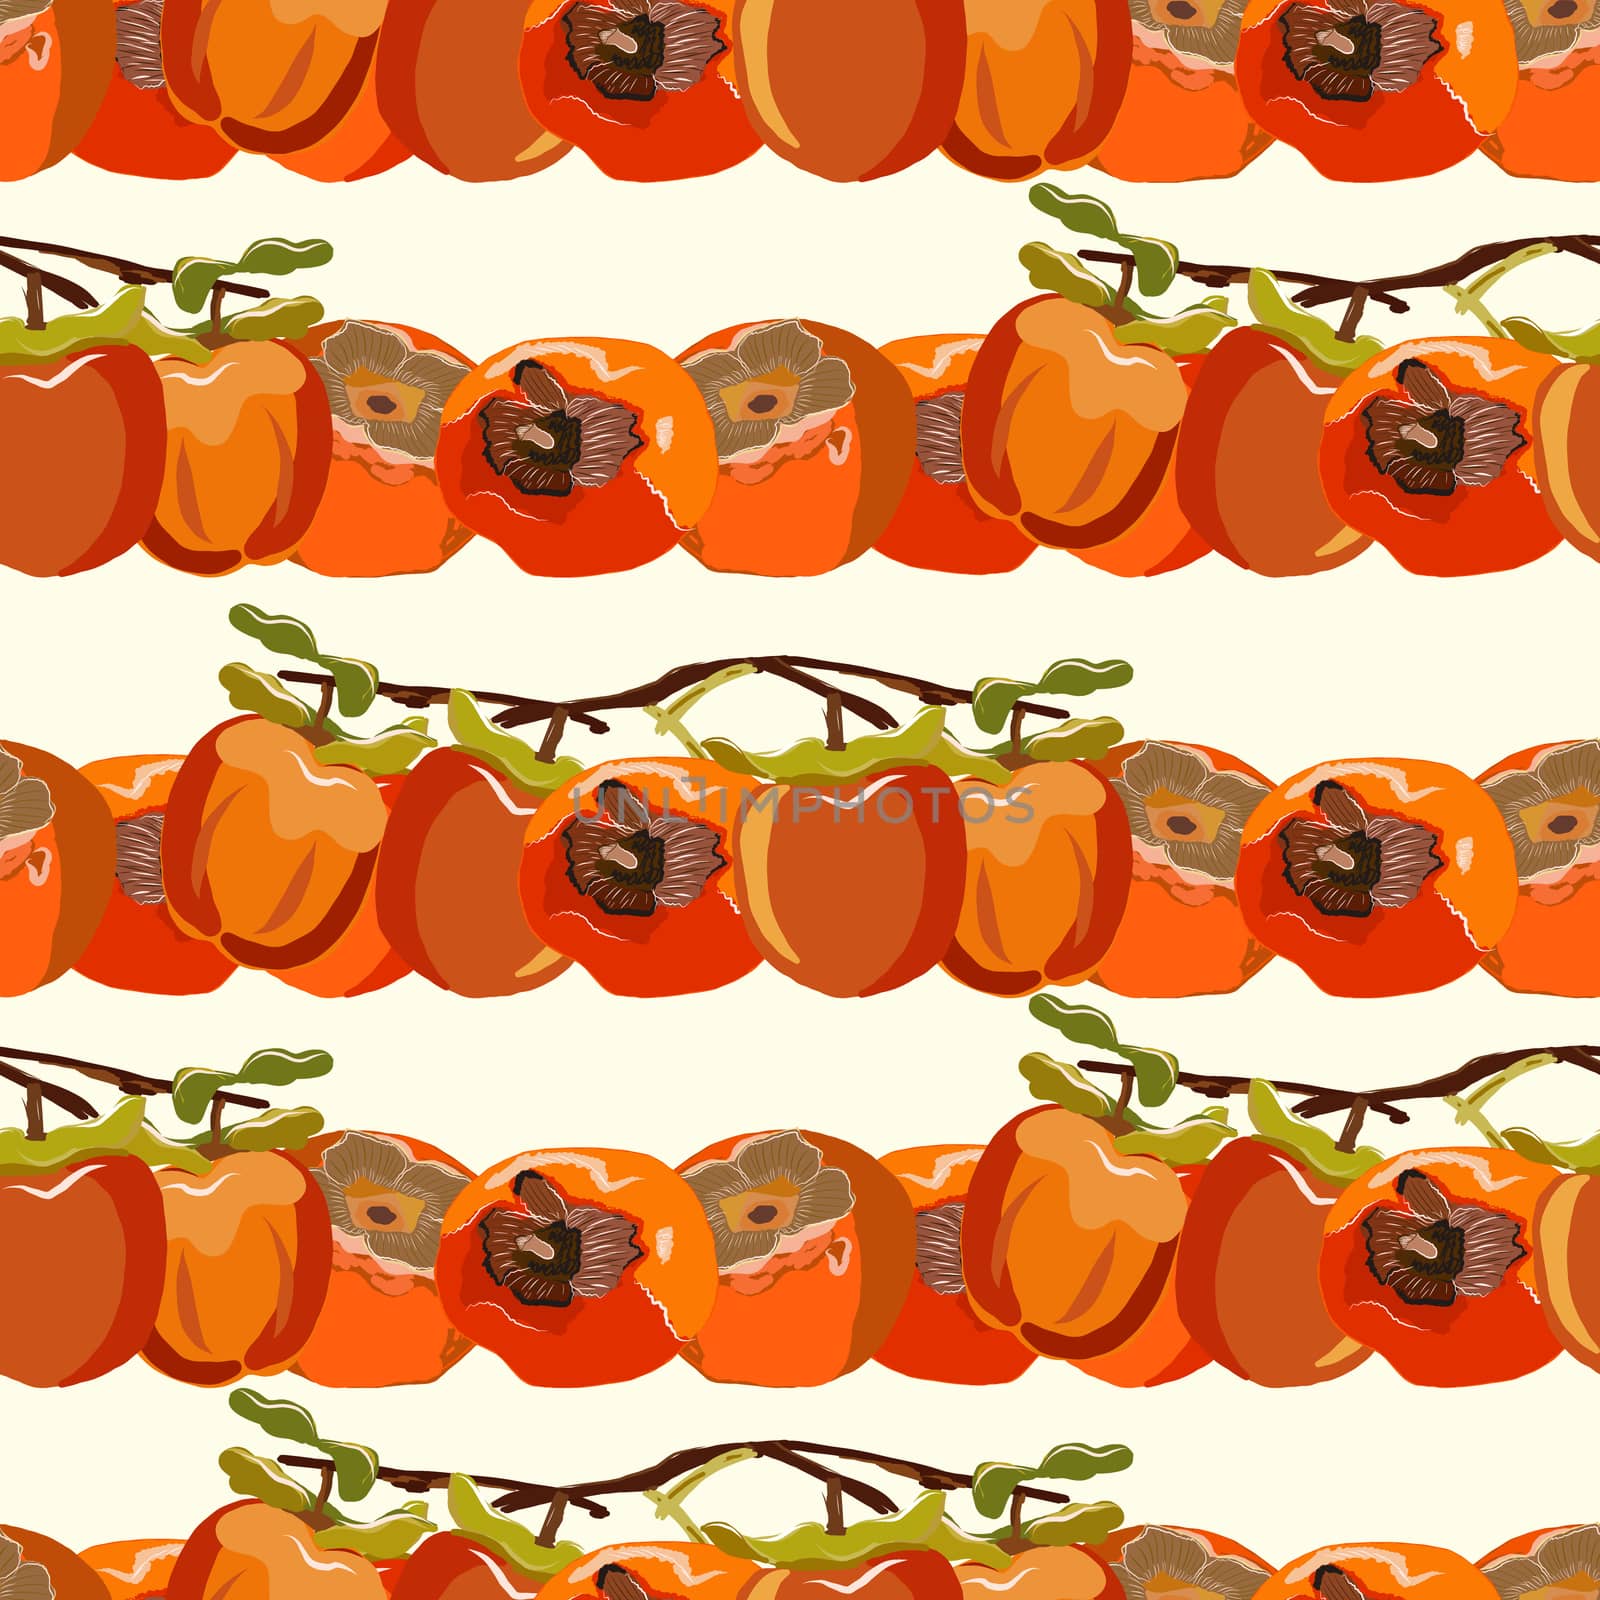 Persimmon branches seamless pattern on a beige background. Sharon fruit endless pattern vector illustration, design for wallpapers, fabrics, textiles, packaging.